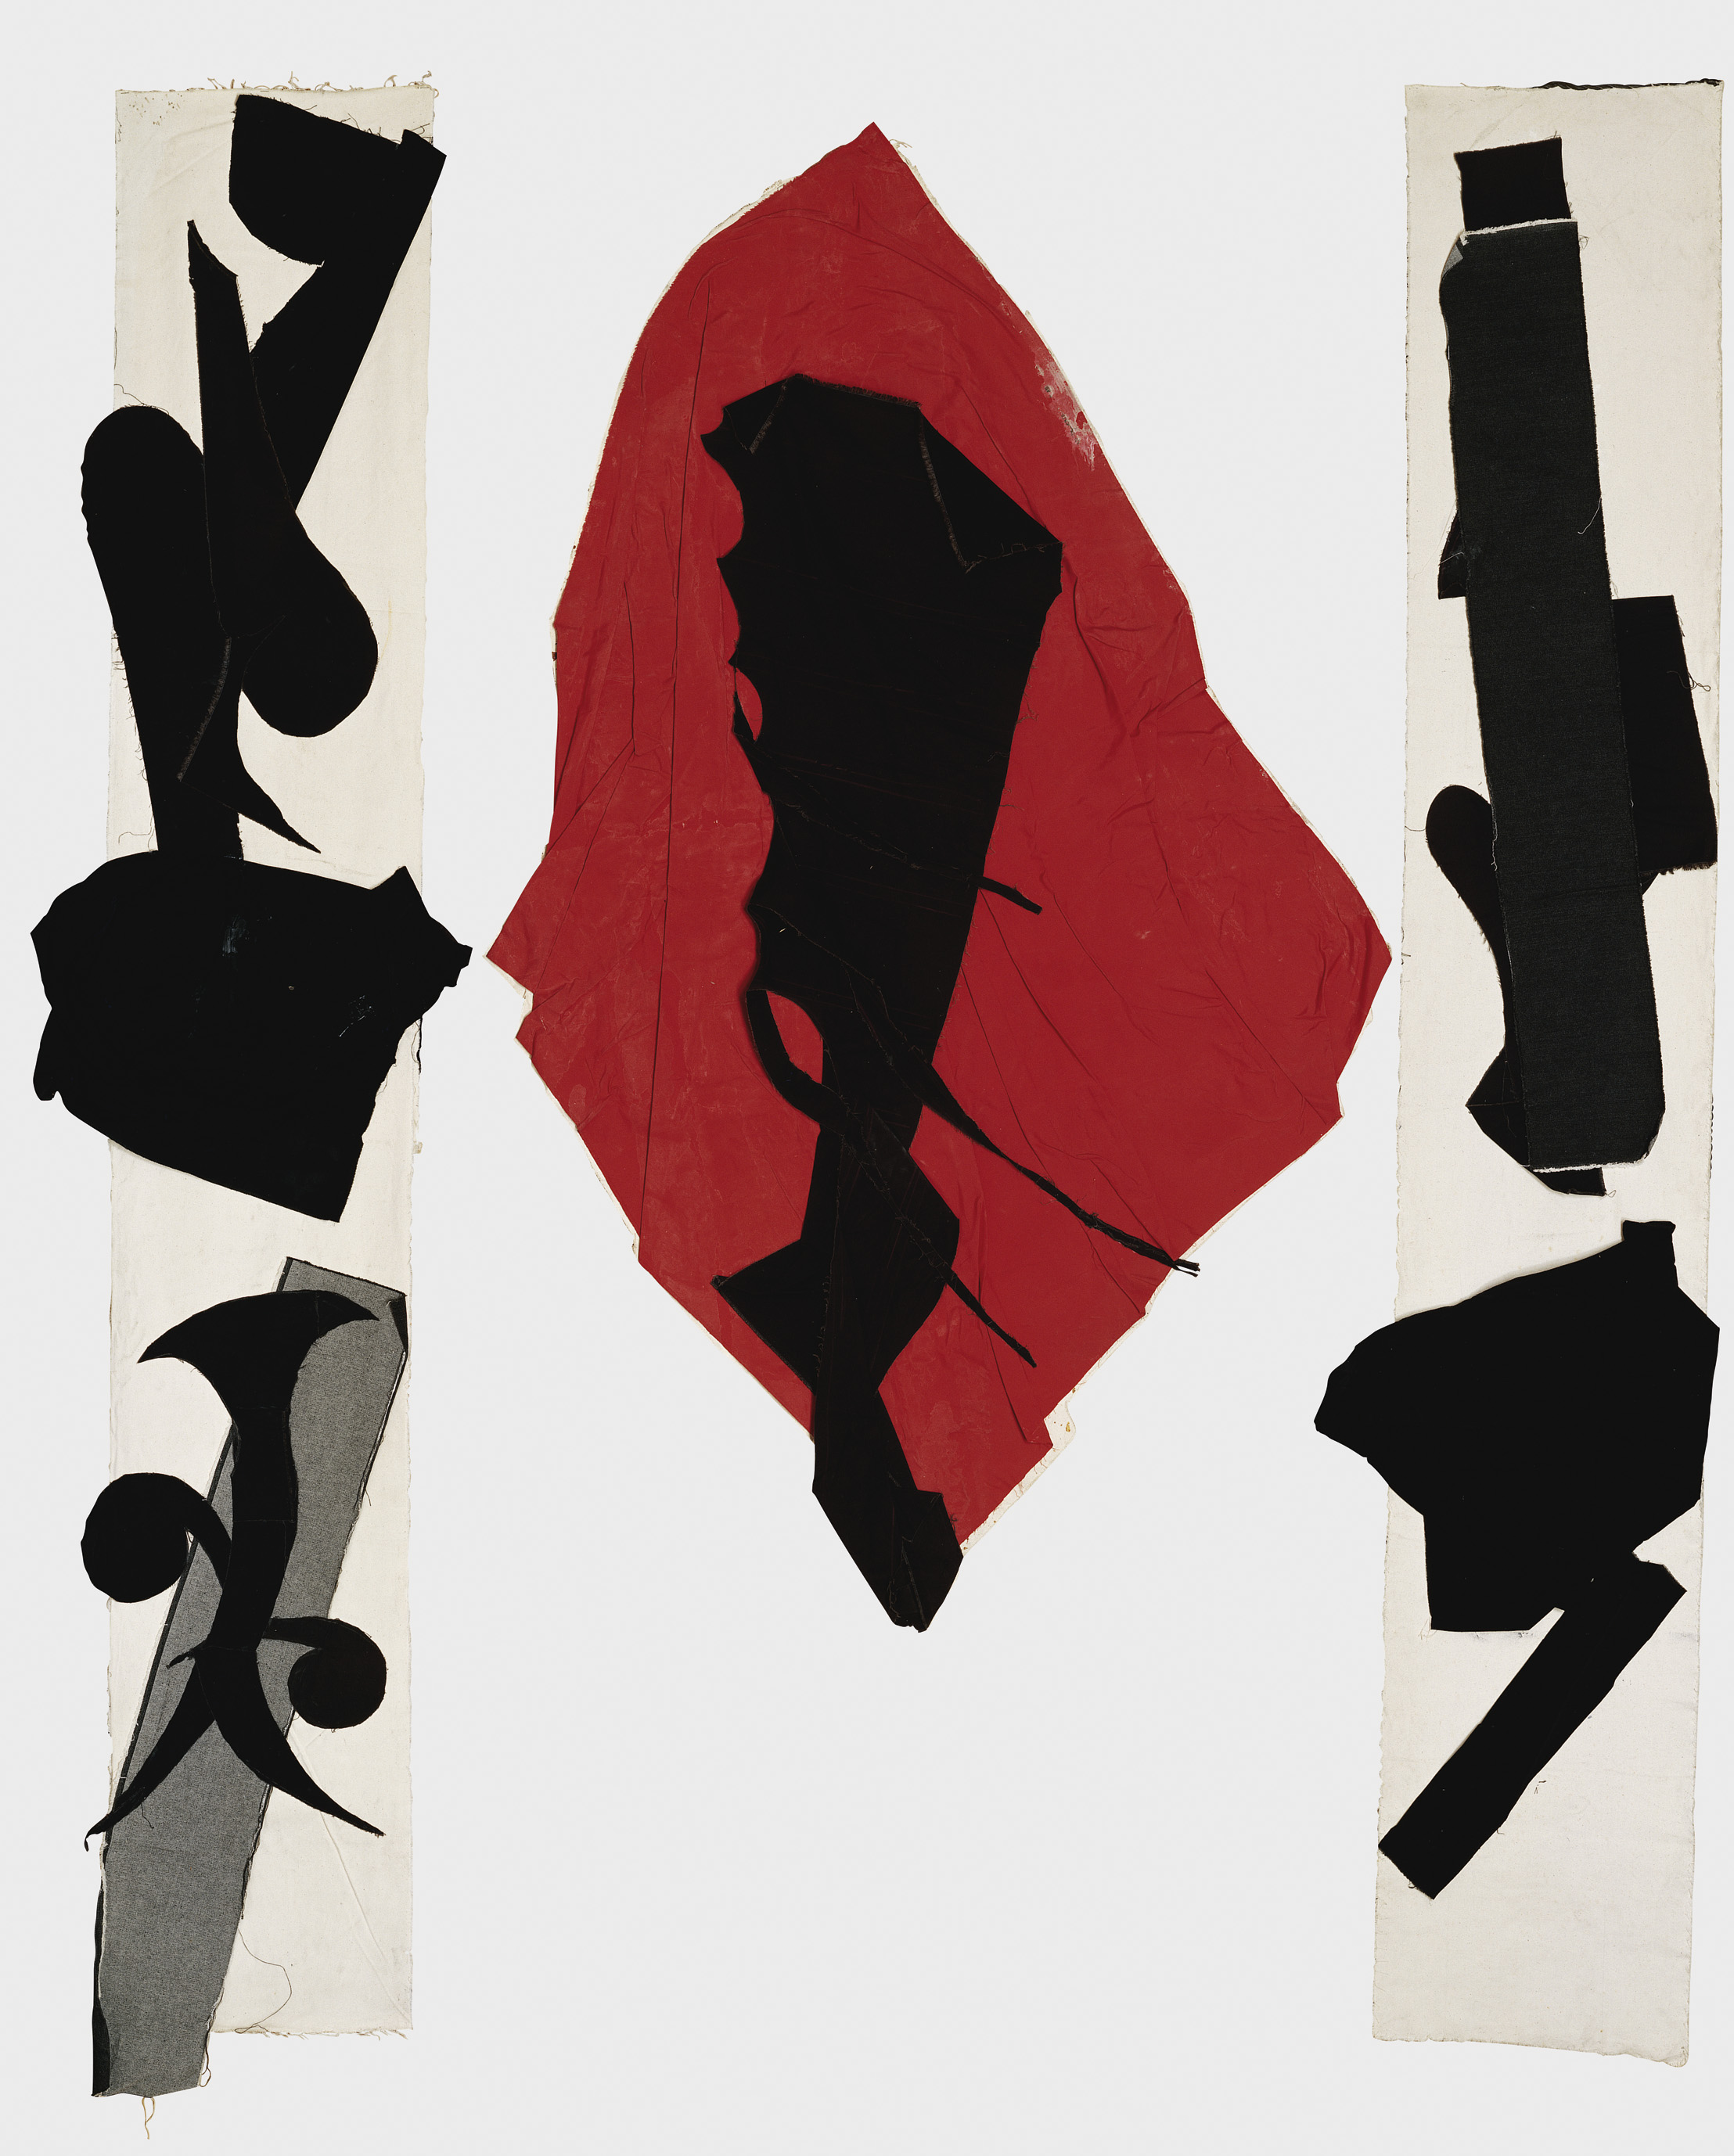 CHEN Hsing-Wan  | Stroll (Red Black) Fabric and collage, 1994-1998 287 x 250 x 25 cm  Collection of the Taipei Fine Arts Museum 的圖說